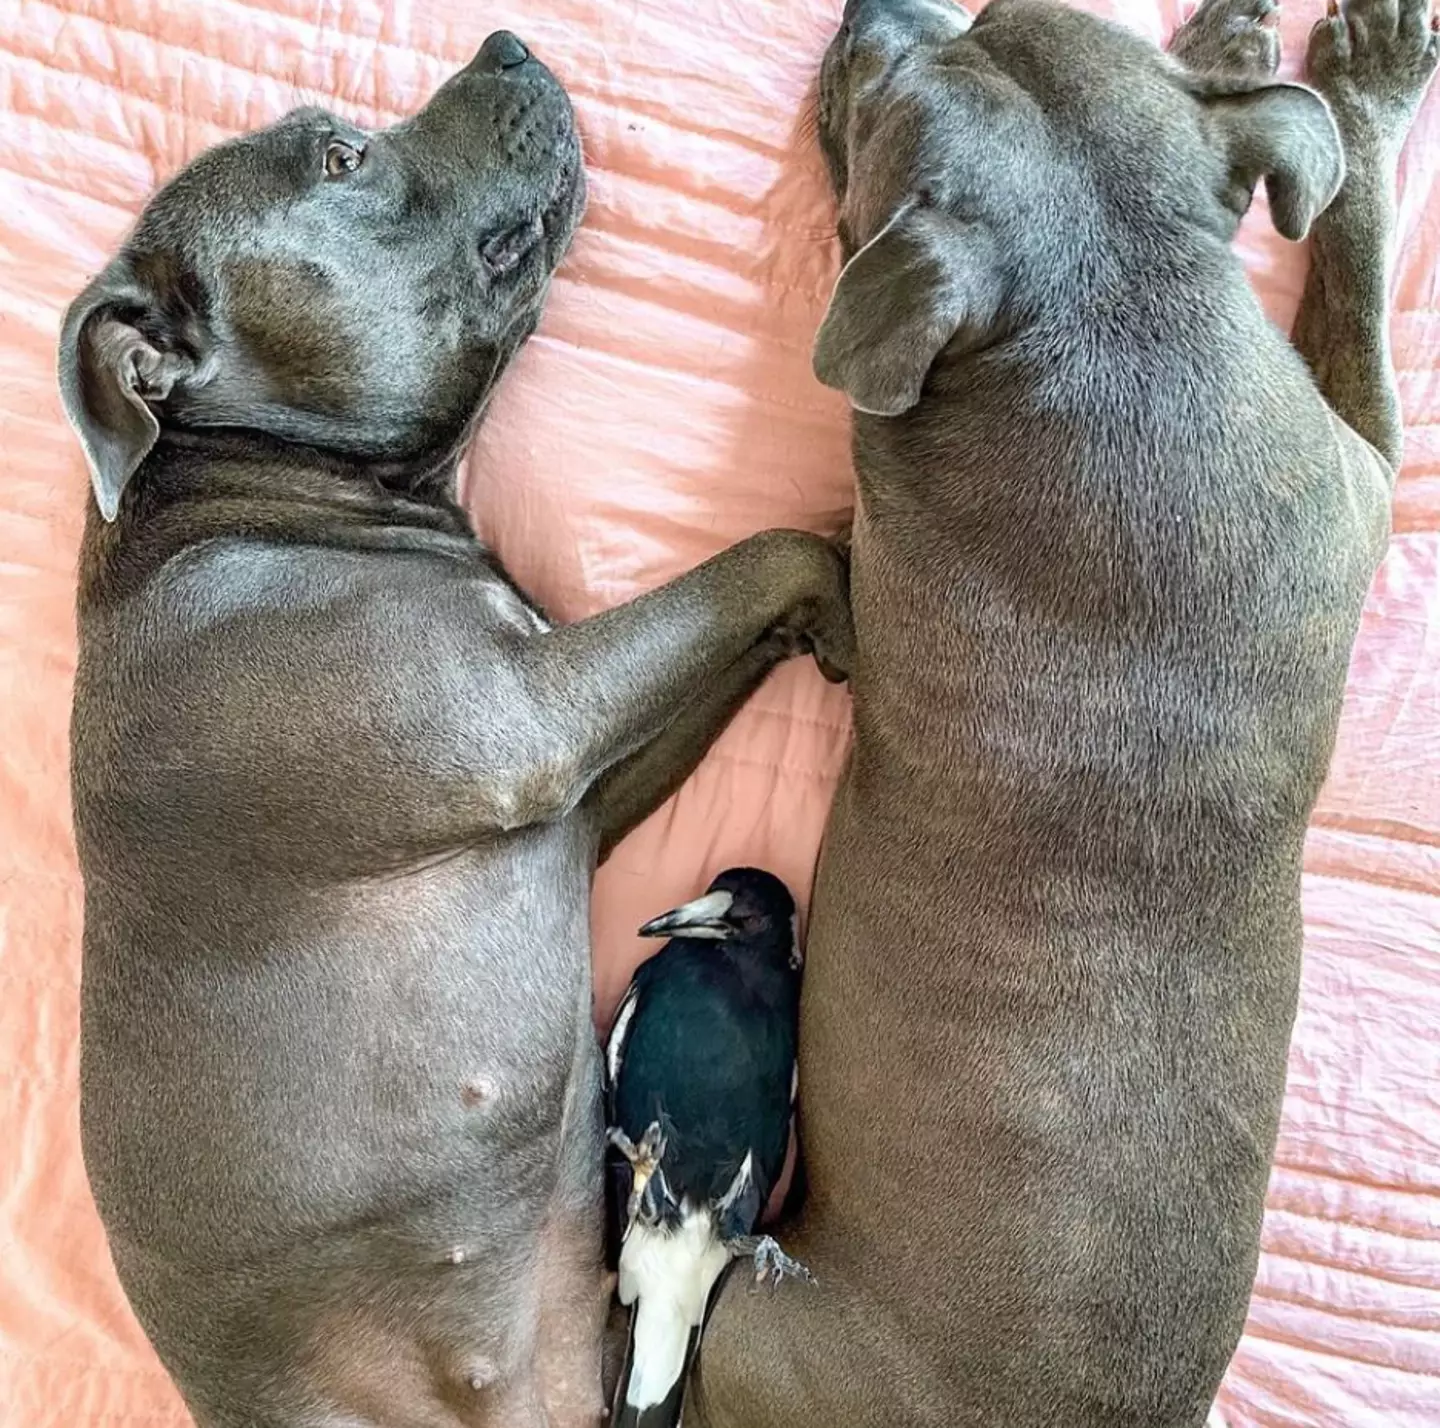 Molly will hopefully soon be reunited with her canine siblings. (Instagram/@peggyandmolly)